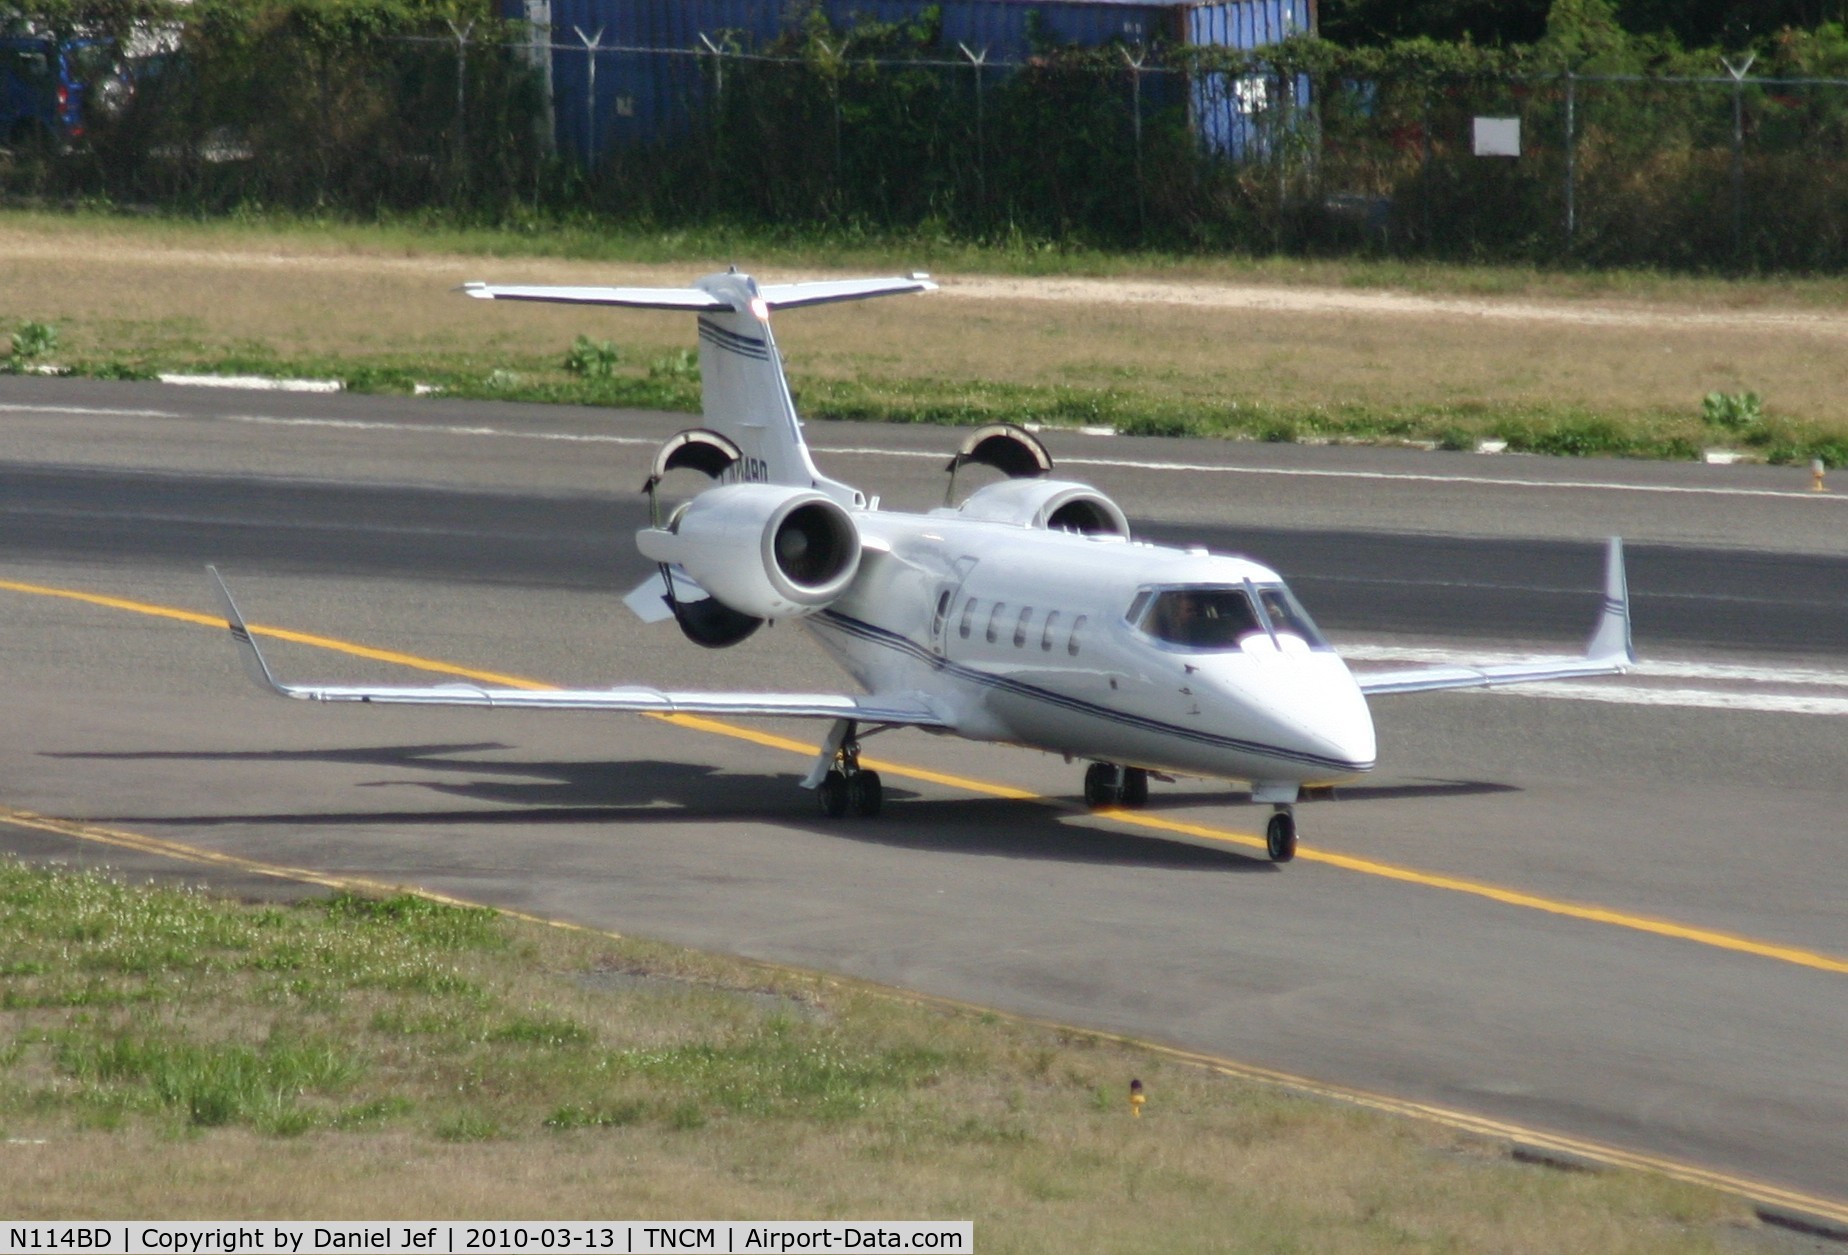 N114BD, 1999 Learjet 60 C/N 60-166, N114bd taxing via Bravo to the cargo ramp with there ears open